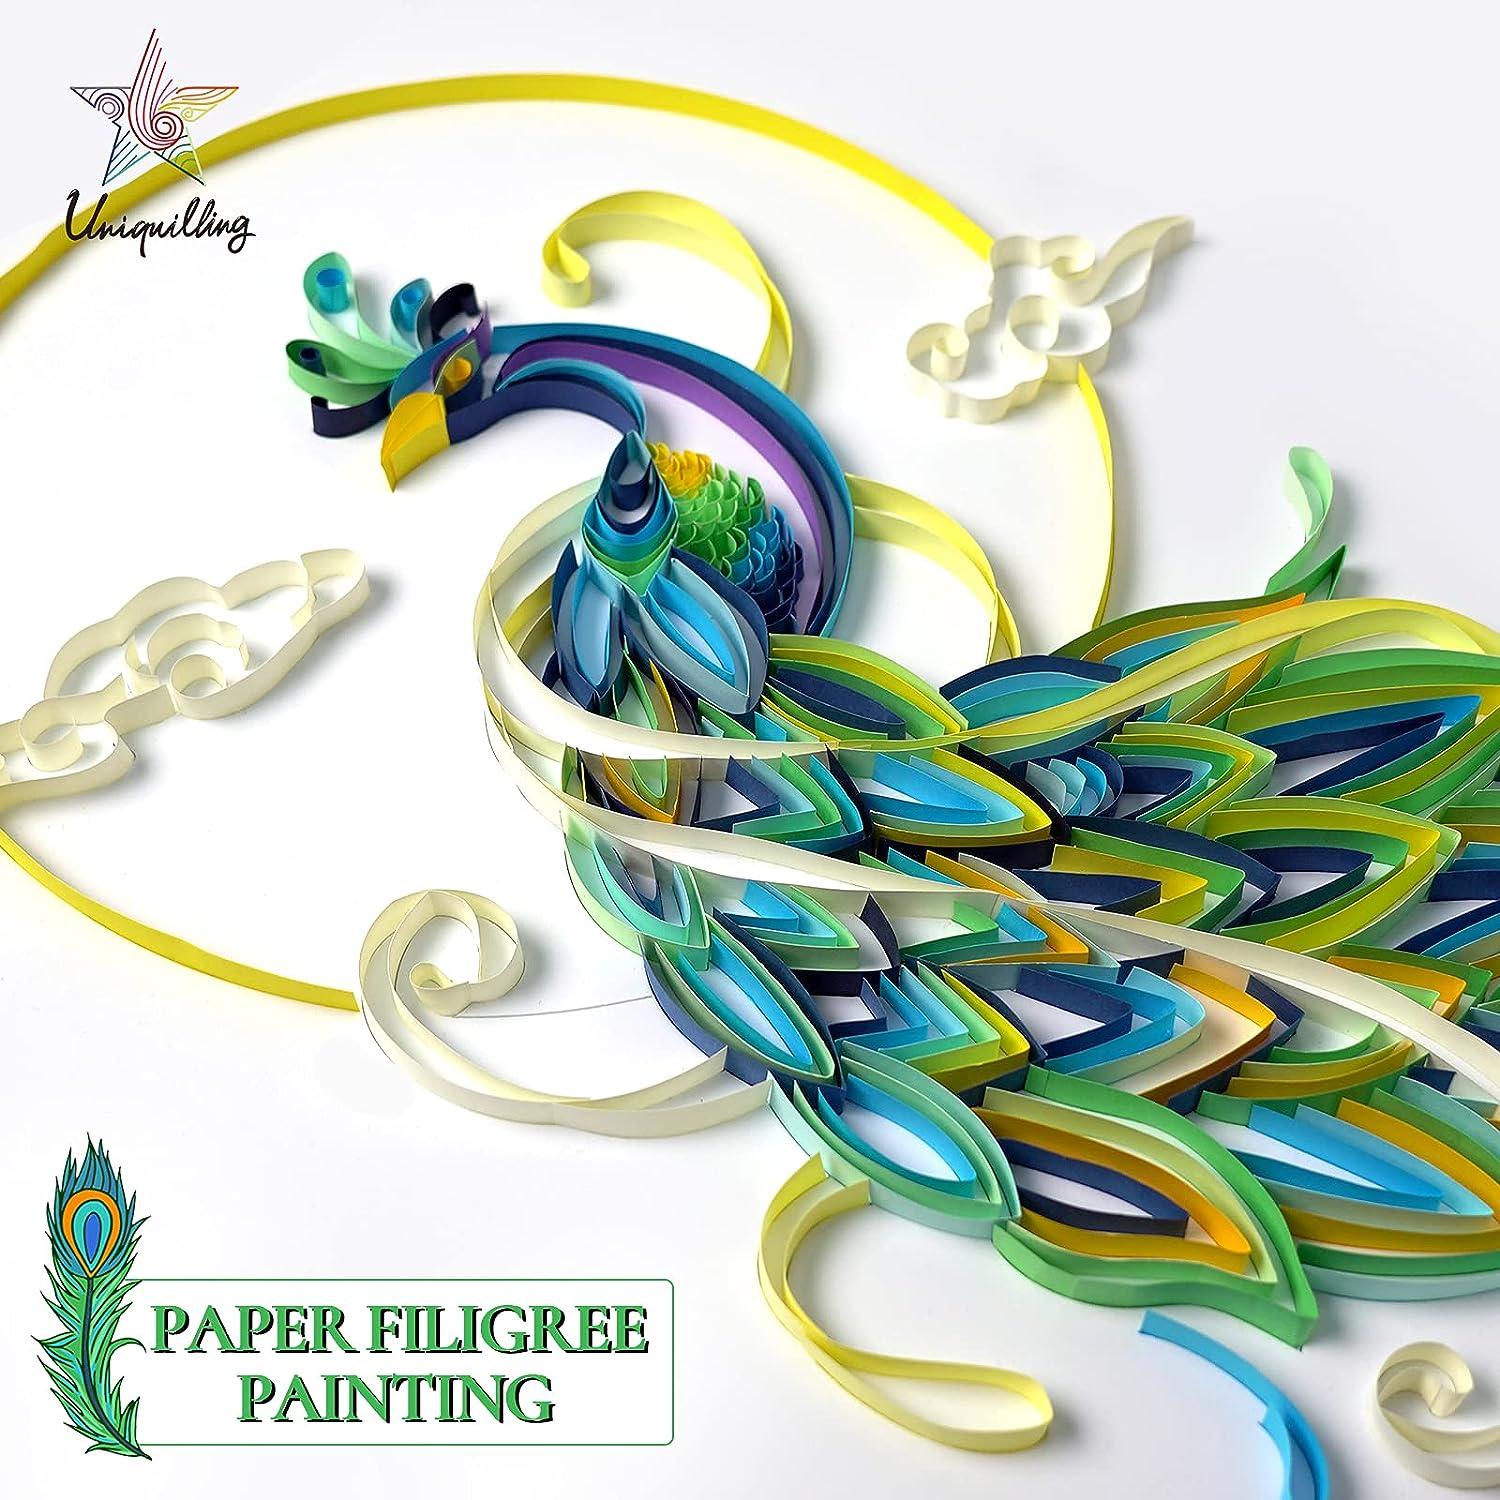 Uniquilling Quilling Kit Paper Filigree Painting Kit for Adults